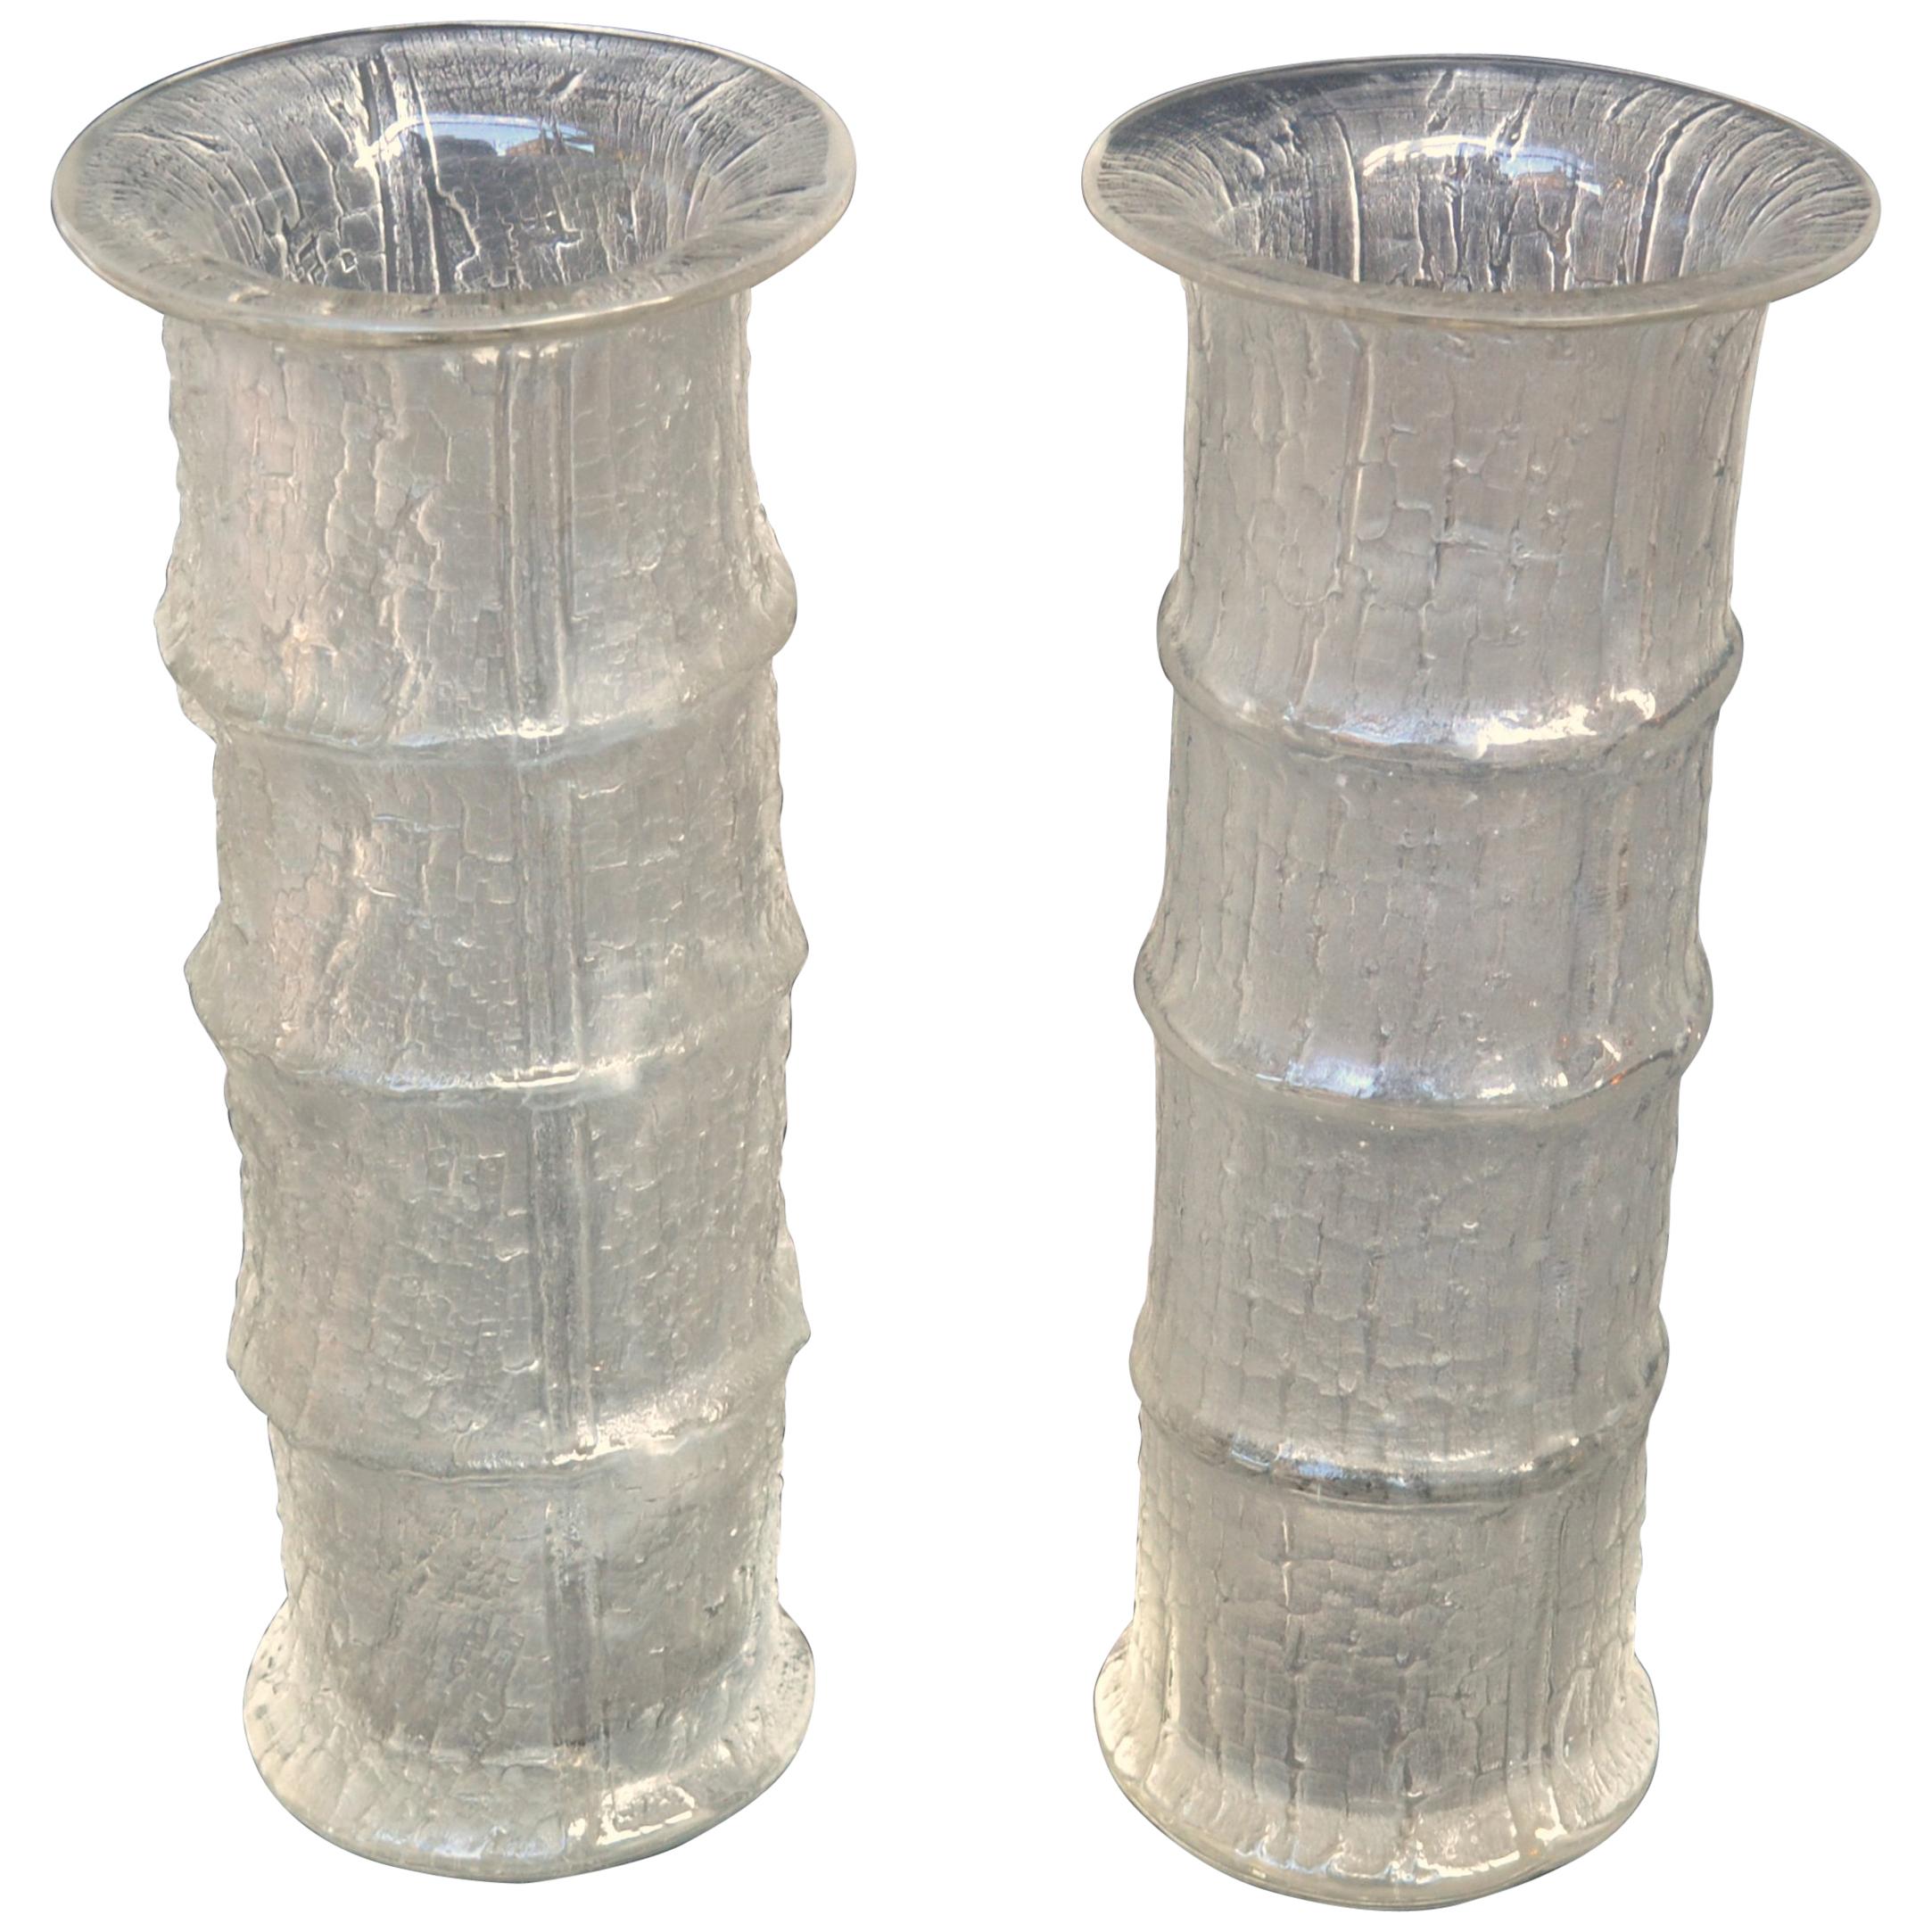 A pair of hand blown glass vases designed in 1964 by Timo Sarpaneva (1926-2006) for Iittala, Finland. Textured glass outside with a bamboo design is achieved by mold-blown technique creating a contrast of smooth glass on the inside and iced glass on